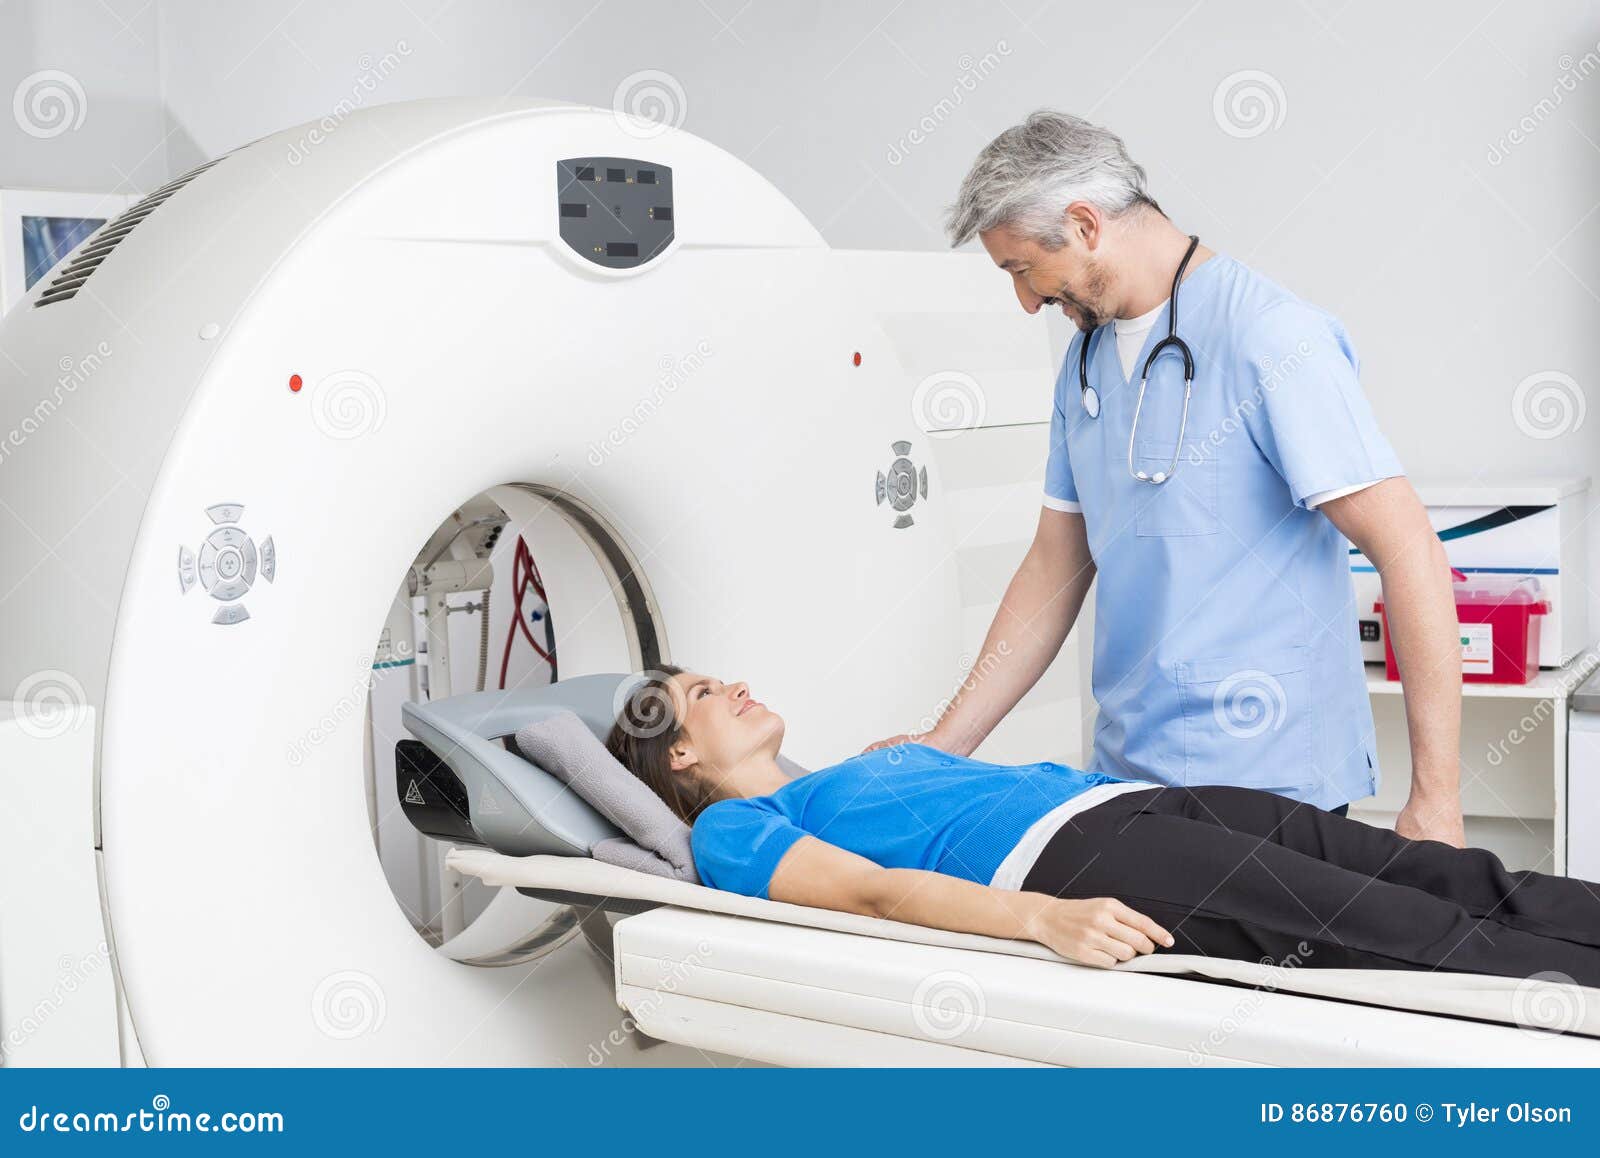 Smiling Doctor Talking To Patient Lying CT Scan Machine Stock Photo - Image of hospital, people: 86876760